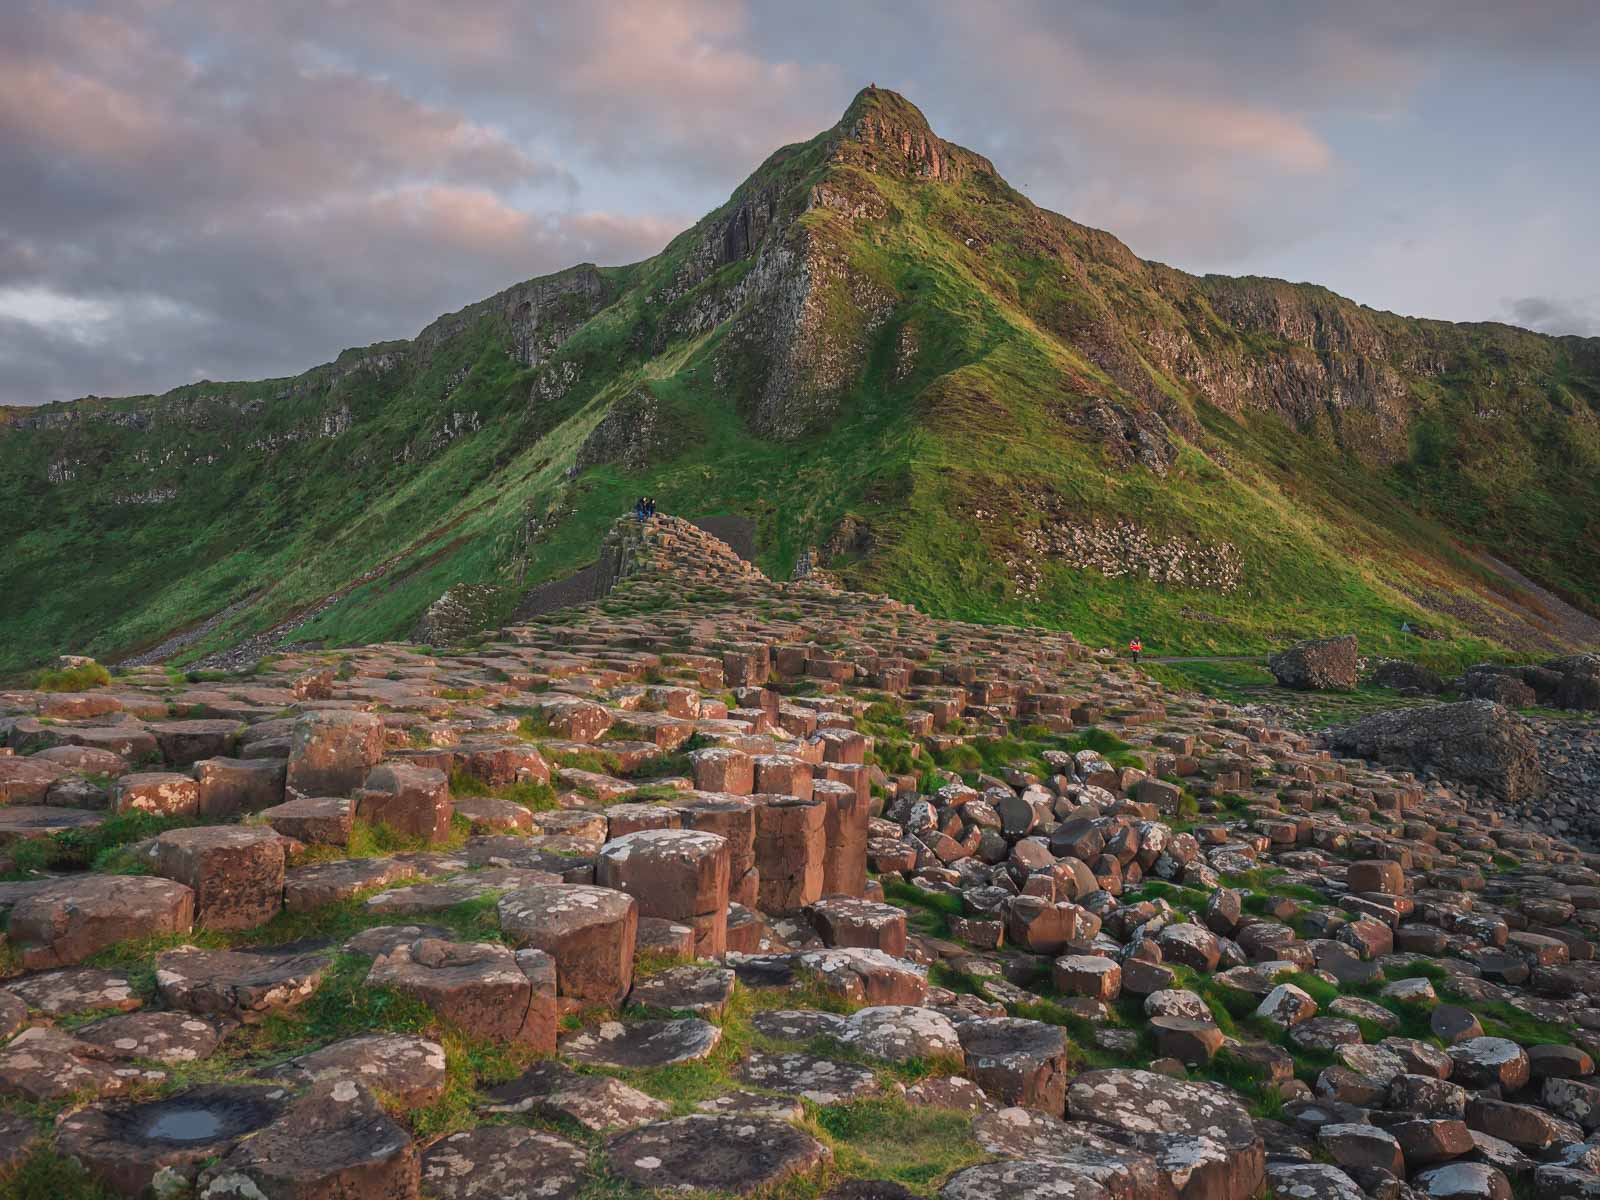 How To Visit the Giant’s Causeway in Northern Ireland